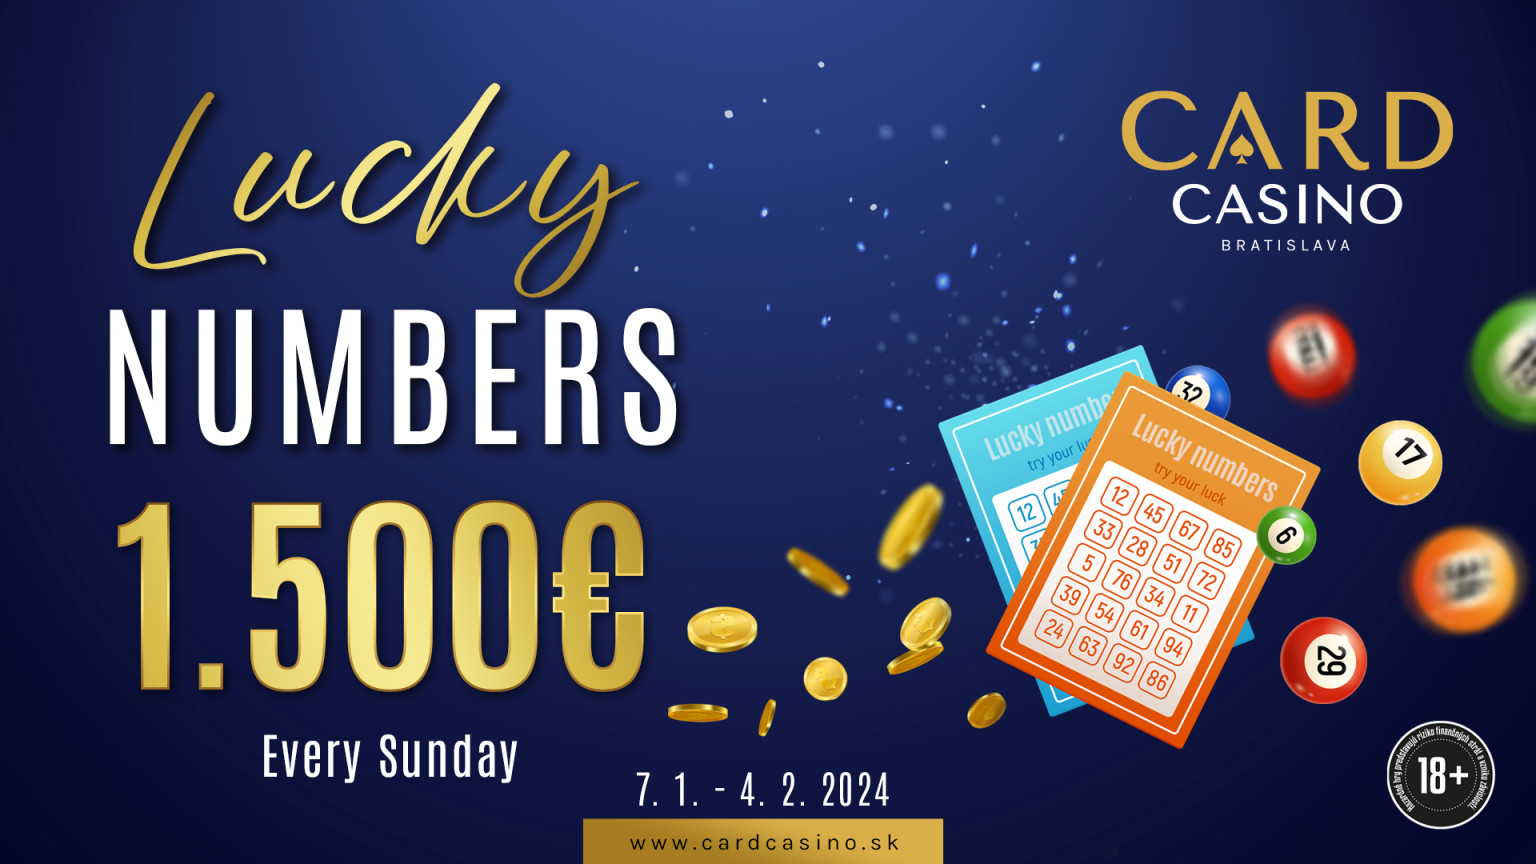 Lucky wears Lucky numbers! A total of €7,500 is up for grabs on Sundays